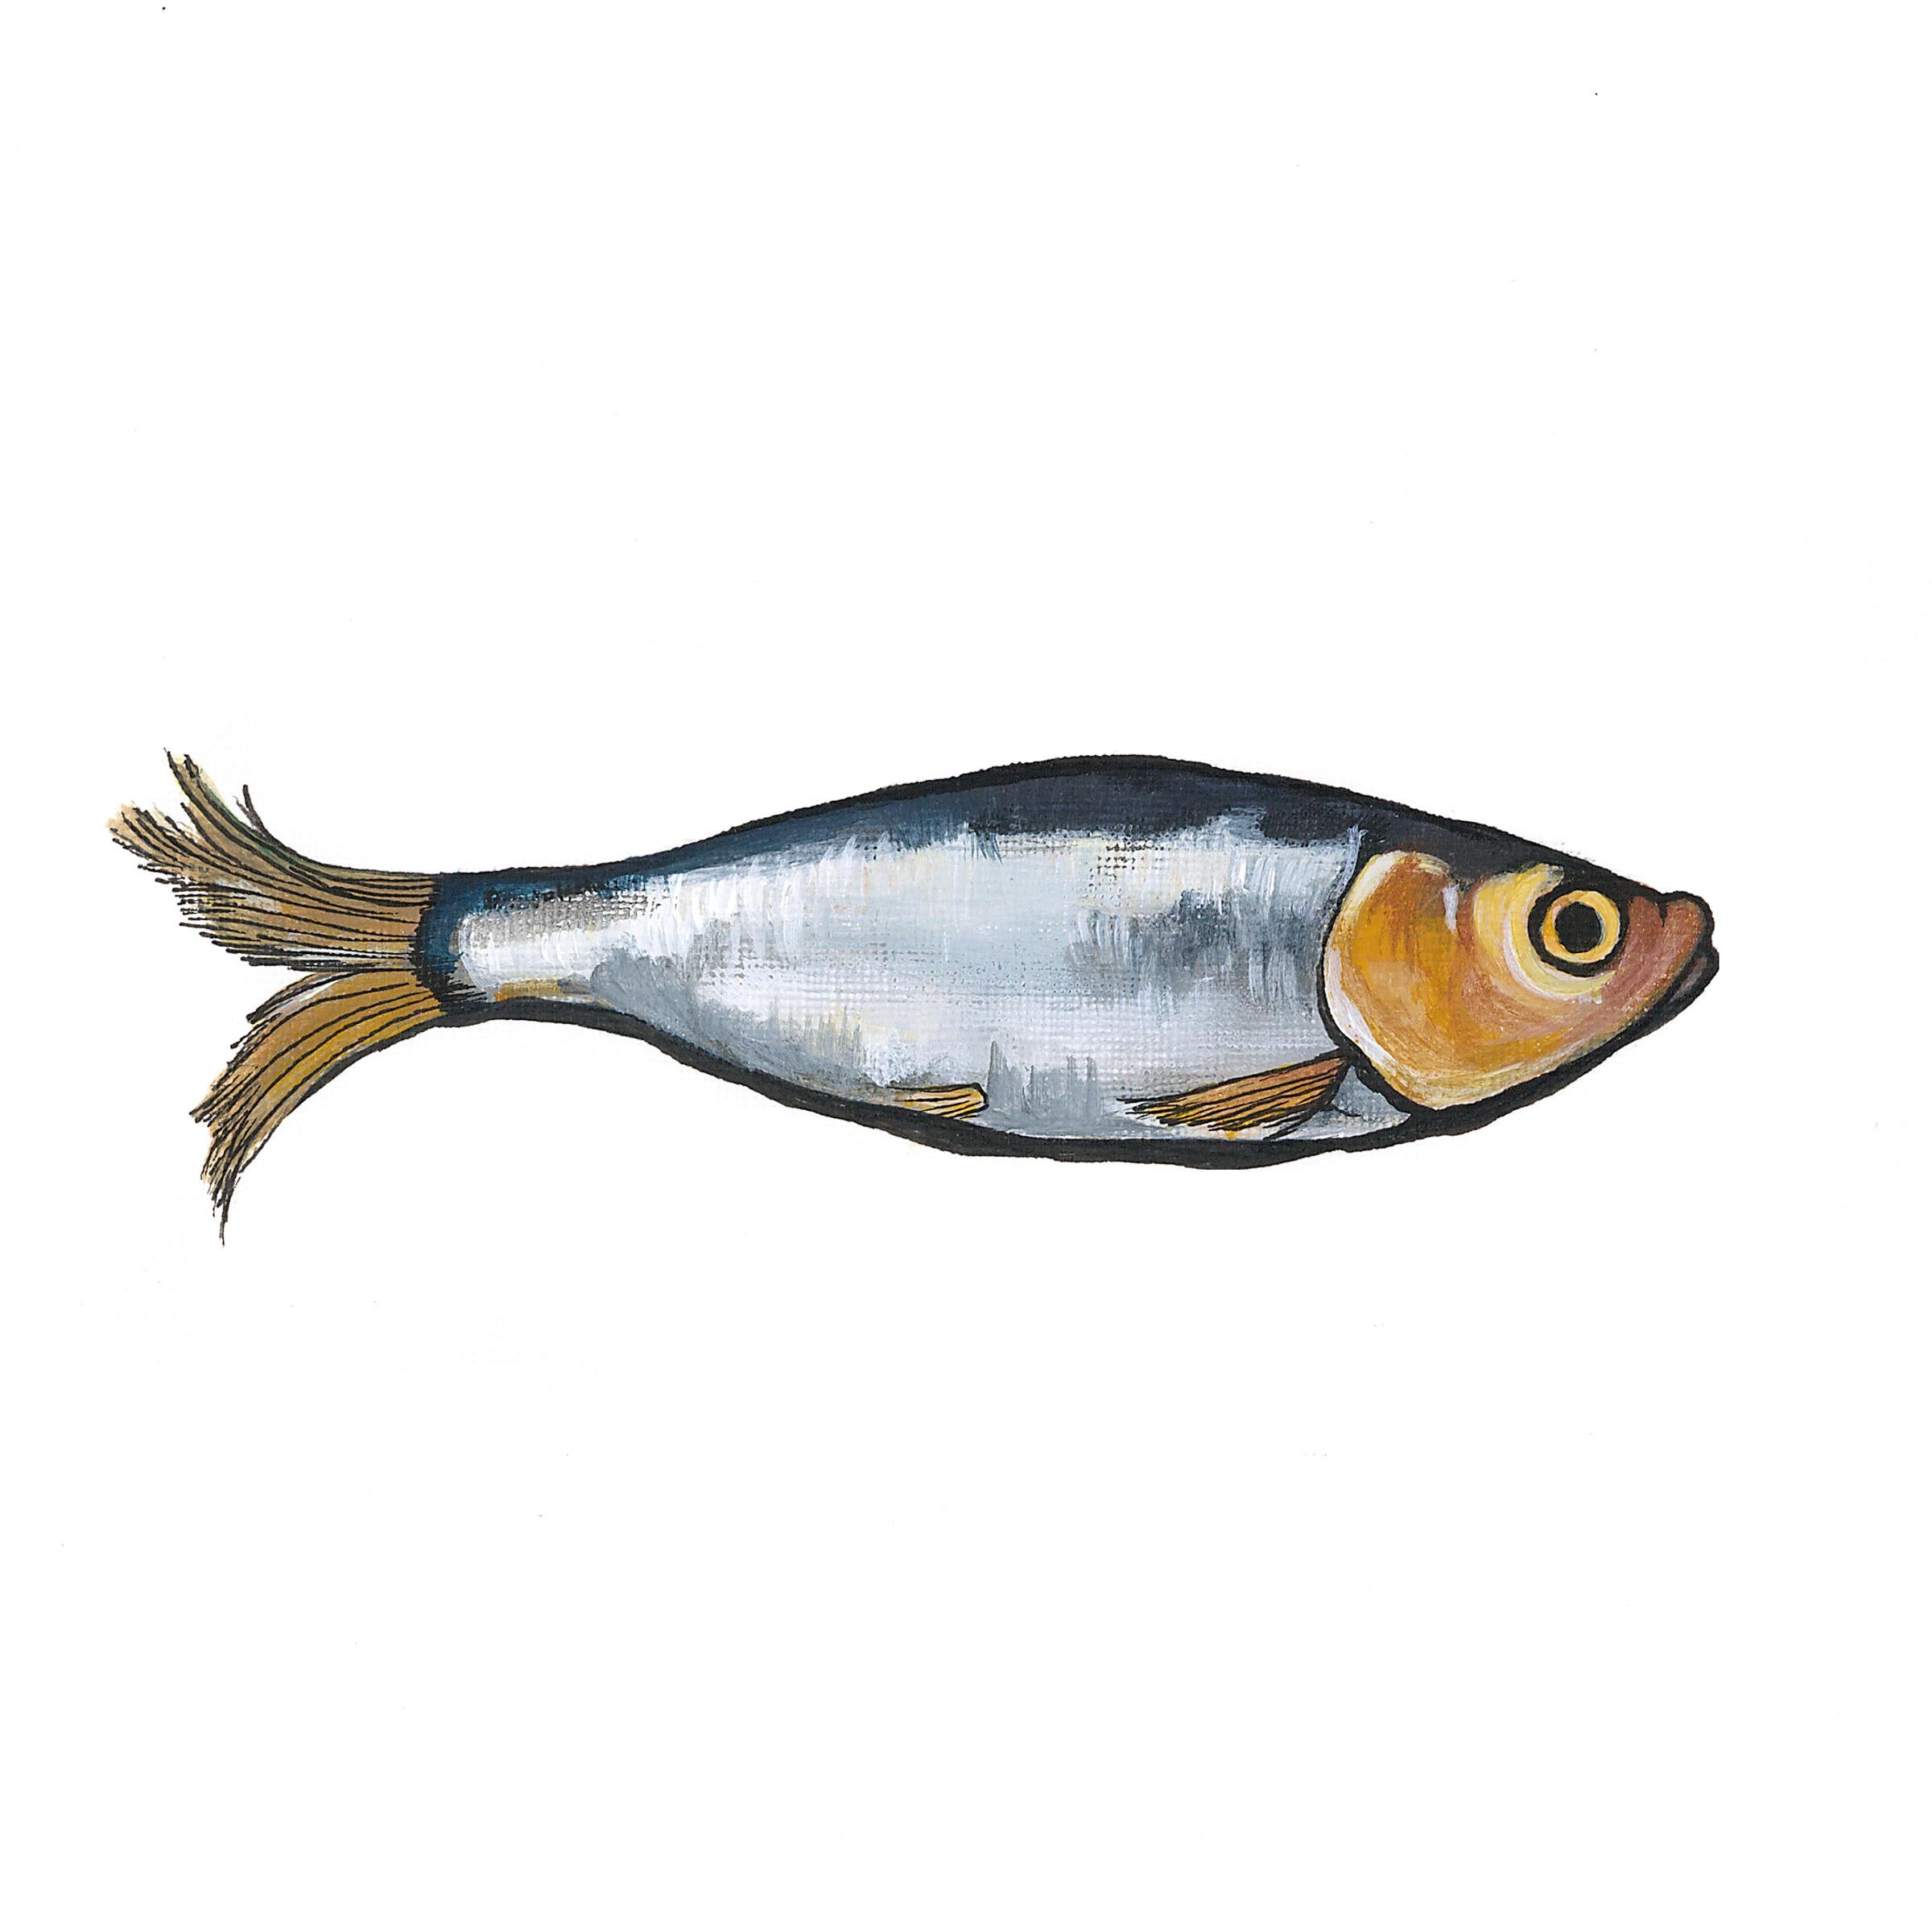 Sprats 1, Sprats 2 ans Sprats 3 - Contemporary Print by Lucy Routh